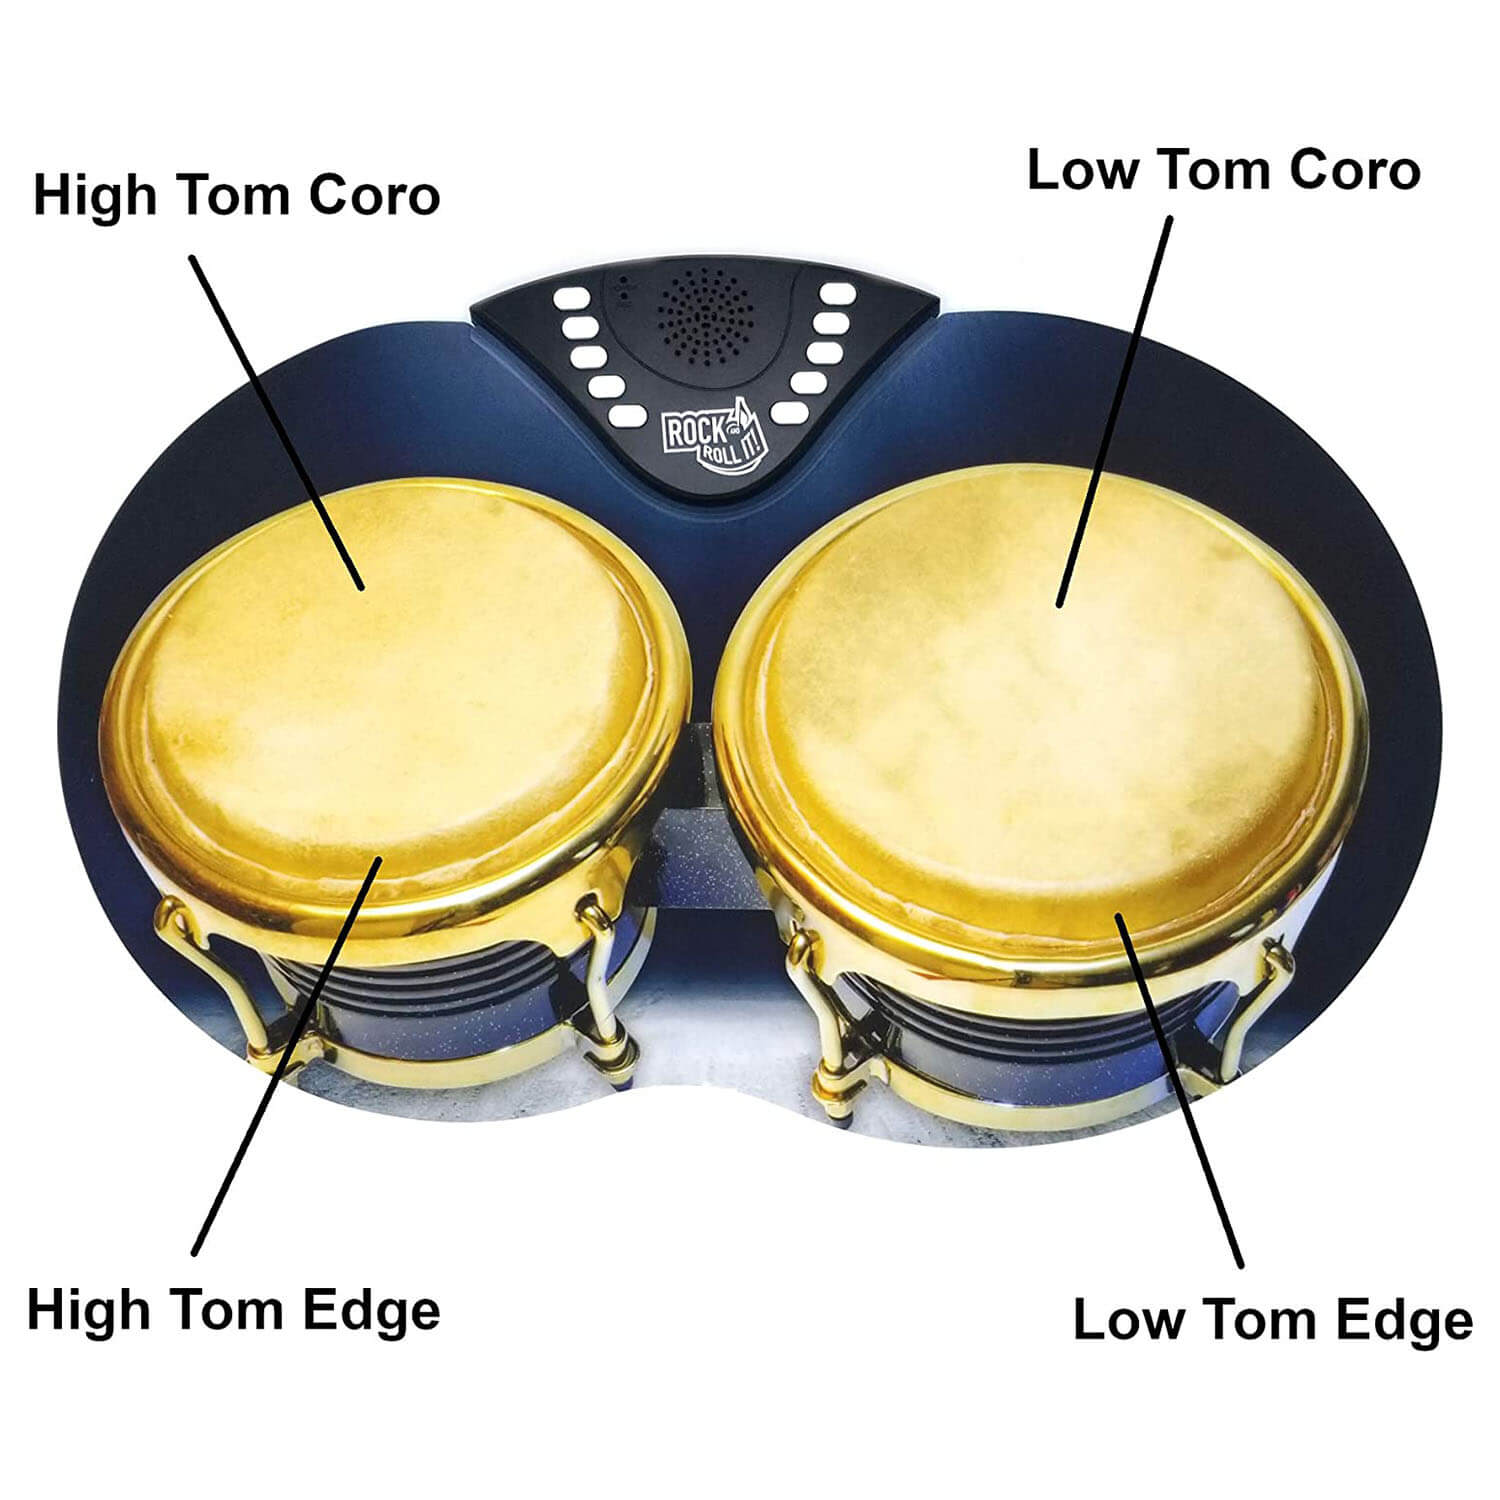 Front view of the rock and roll bongos.